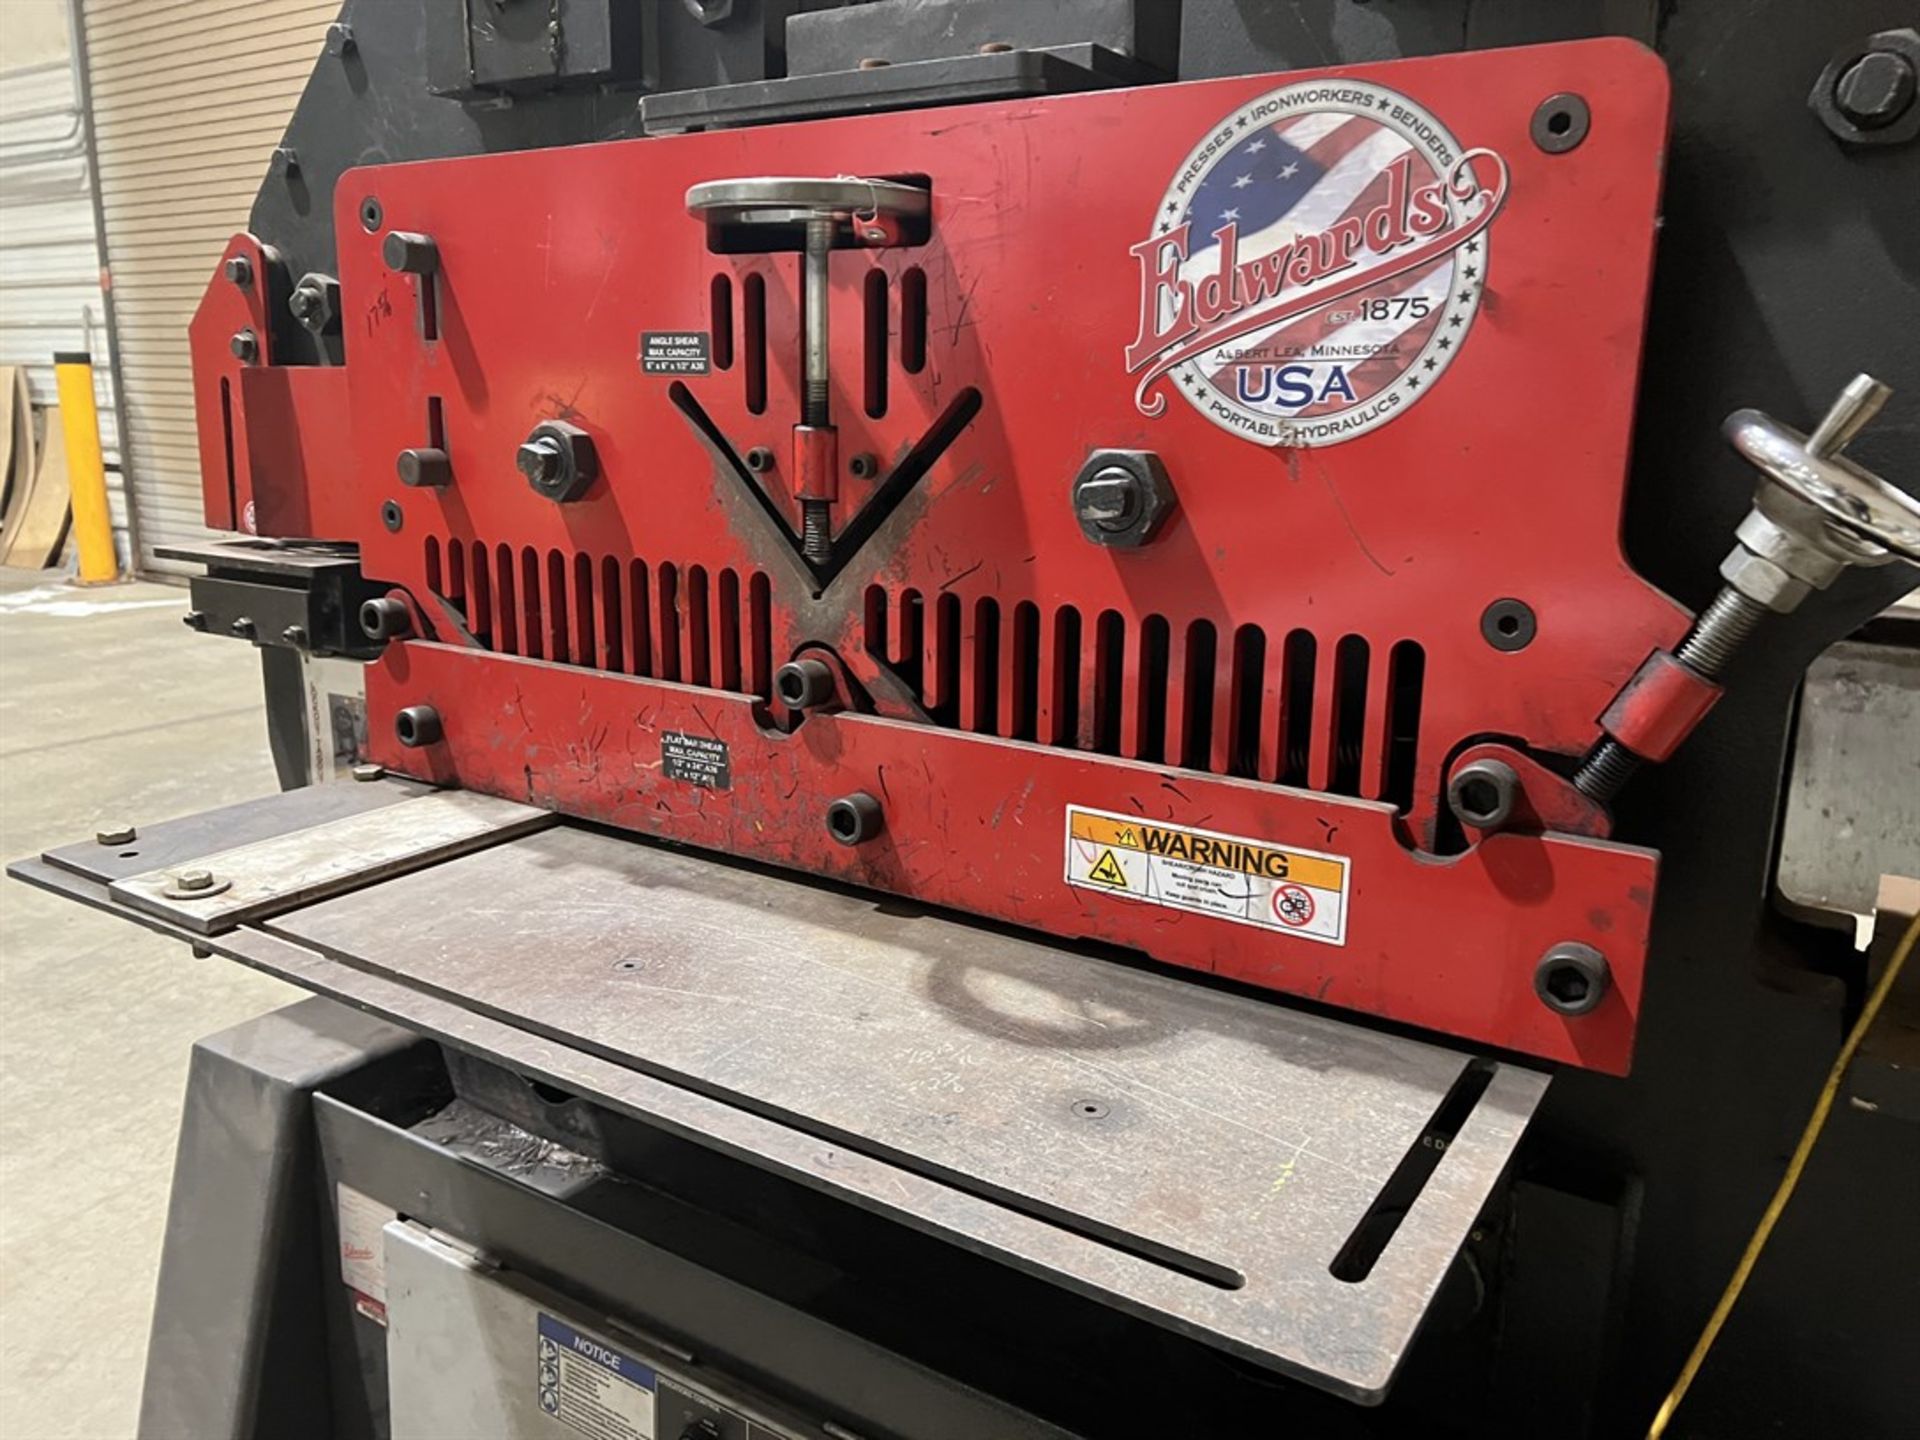 2015 EDWARDS 120 Ton Ironworker, s/n 030715IW120, 1-1/2” Dia in 1” A36 Punch Max Capacity, 2-1/2” - Image 3 of 17